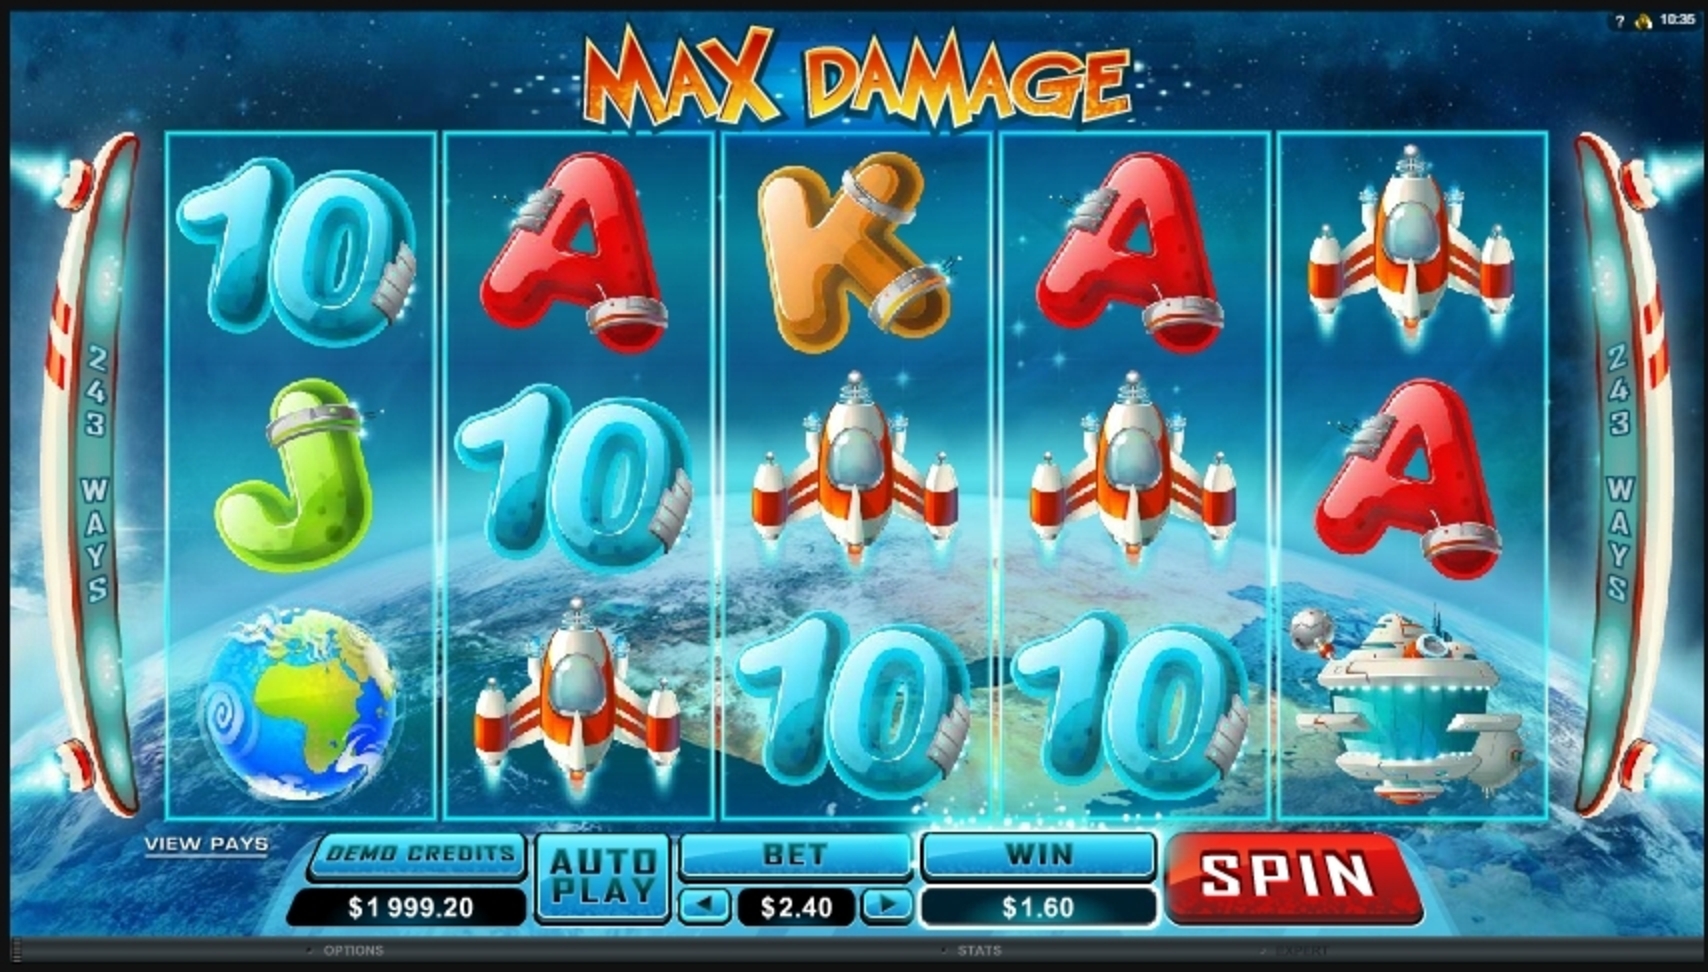 Win Money in Max Damage Free Slot Game by Microgaming